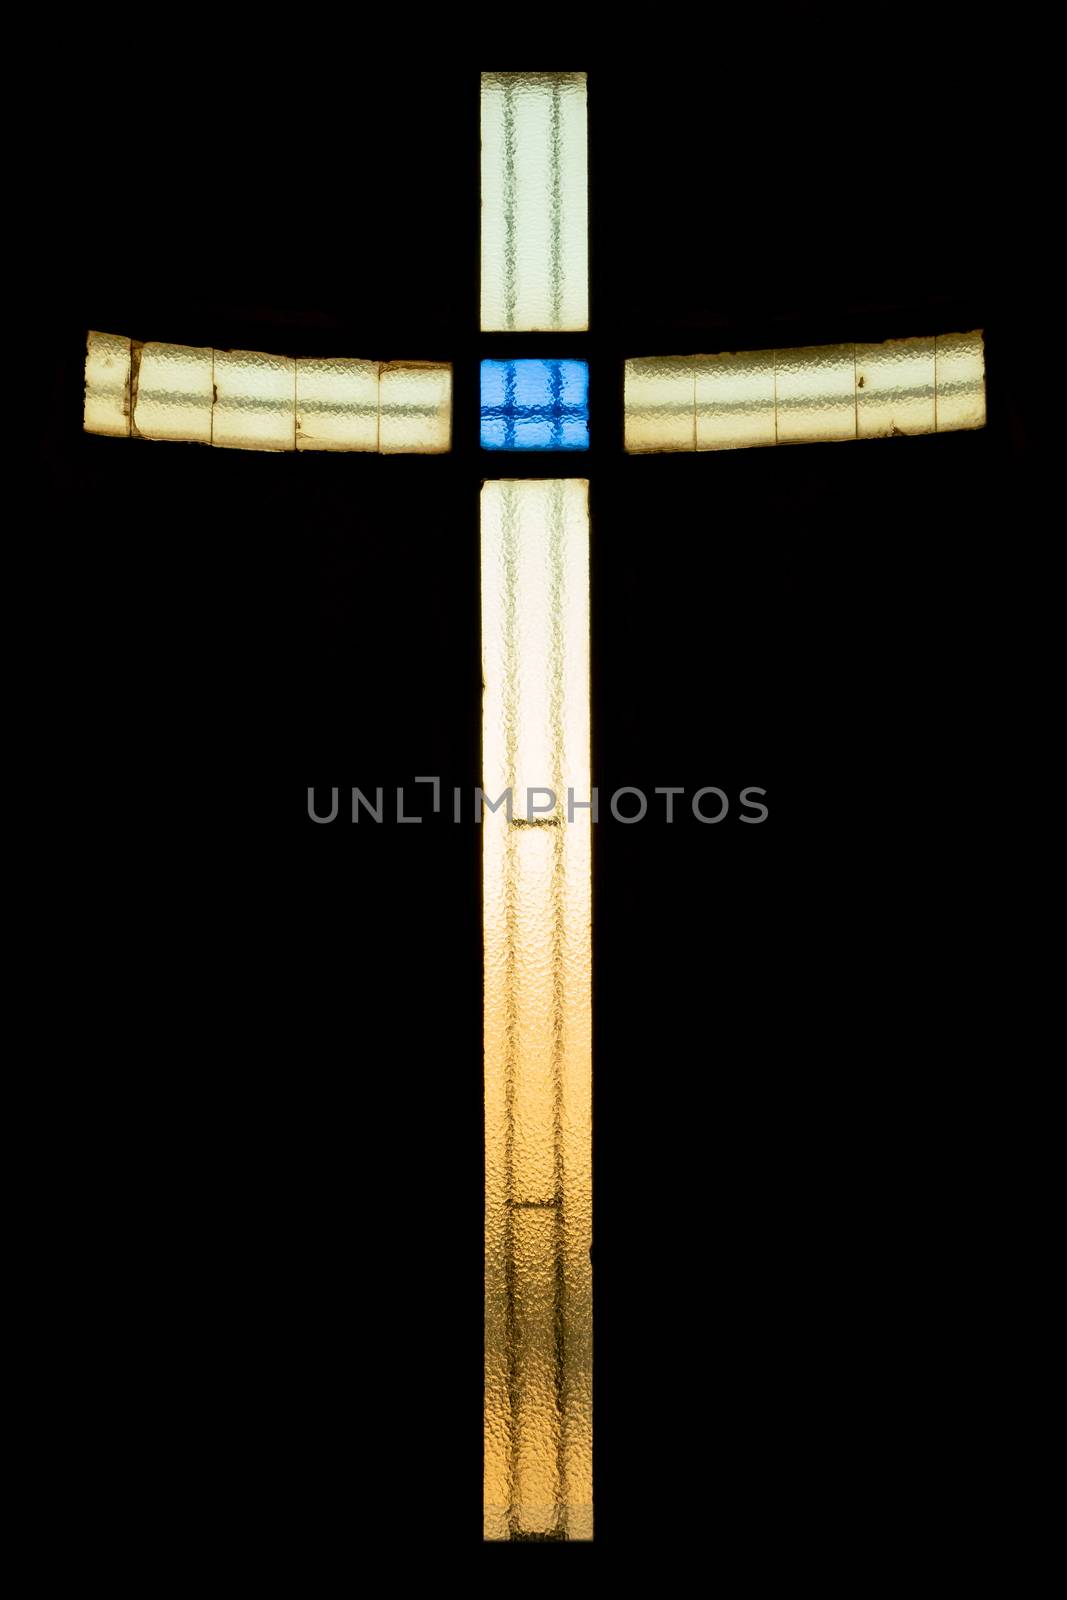 Stained glass cross in bright vivid colors by germanopoli